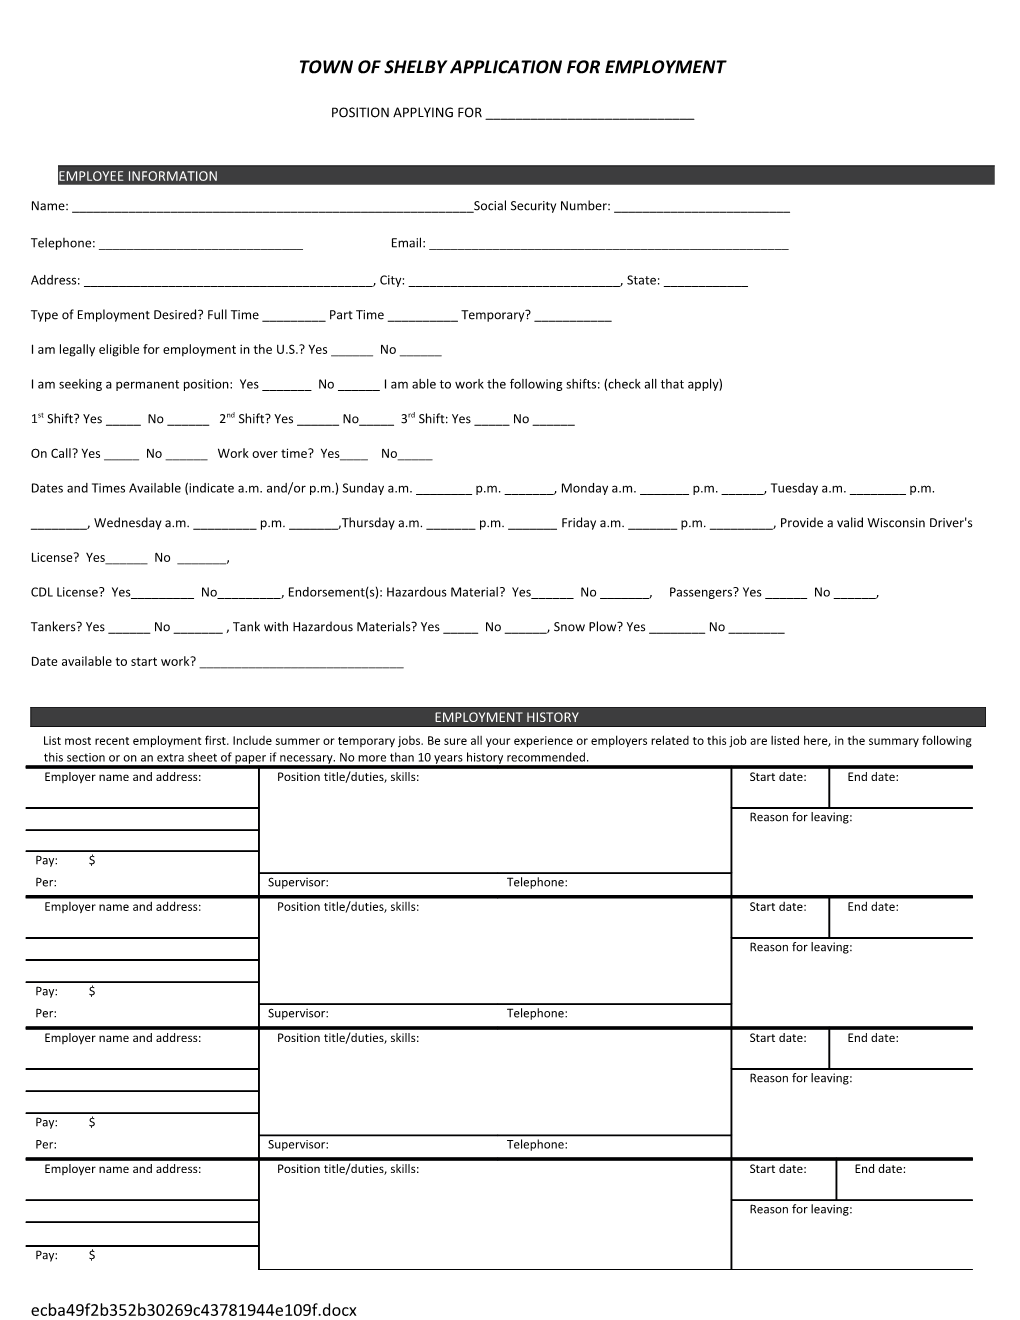 Town of Shelby Application for Employment